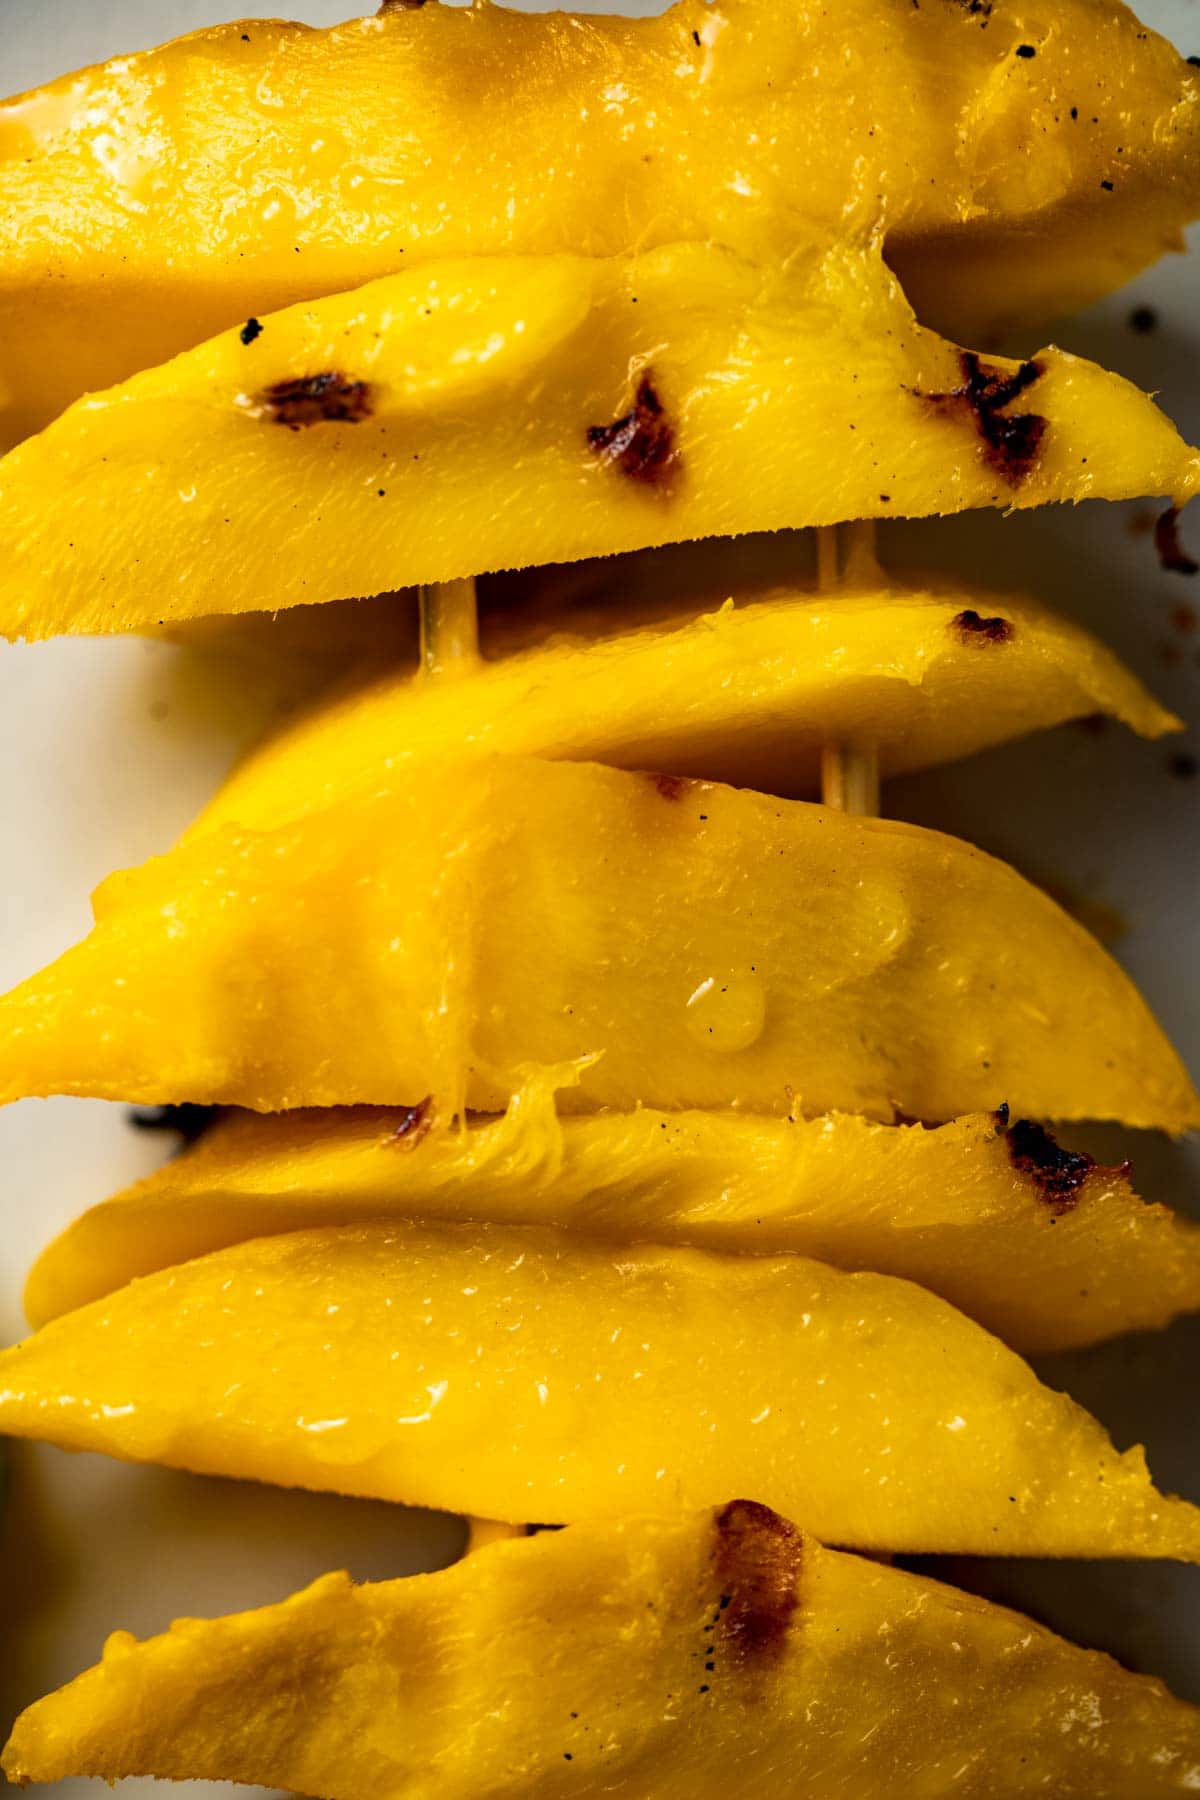 Overhead close up view of grilled mango slices.